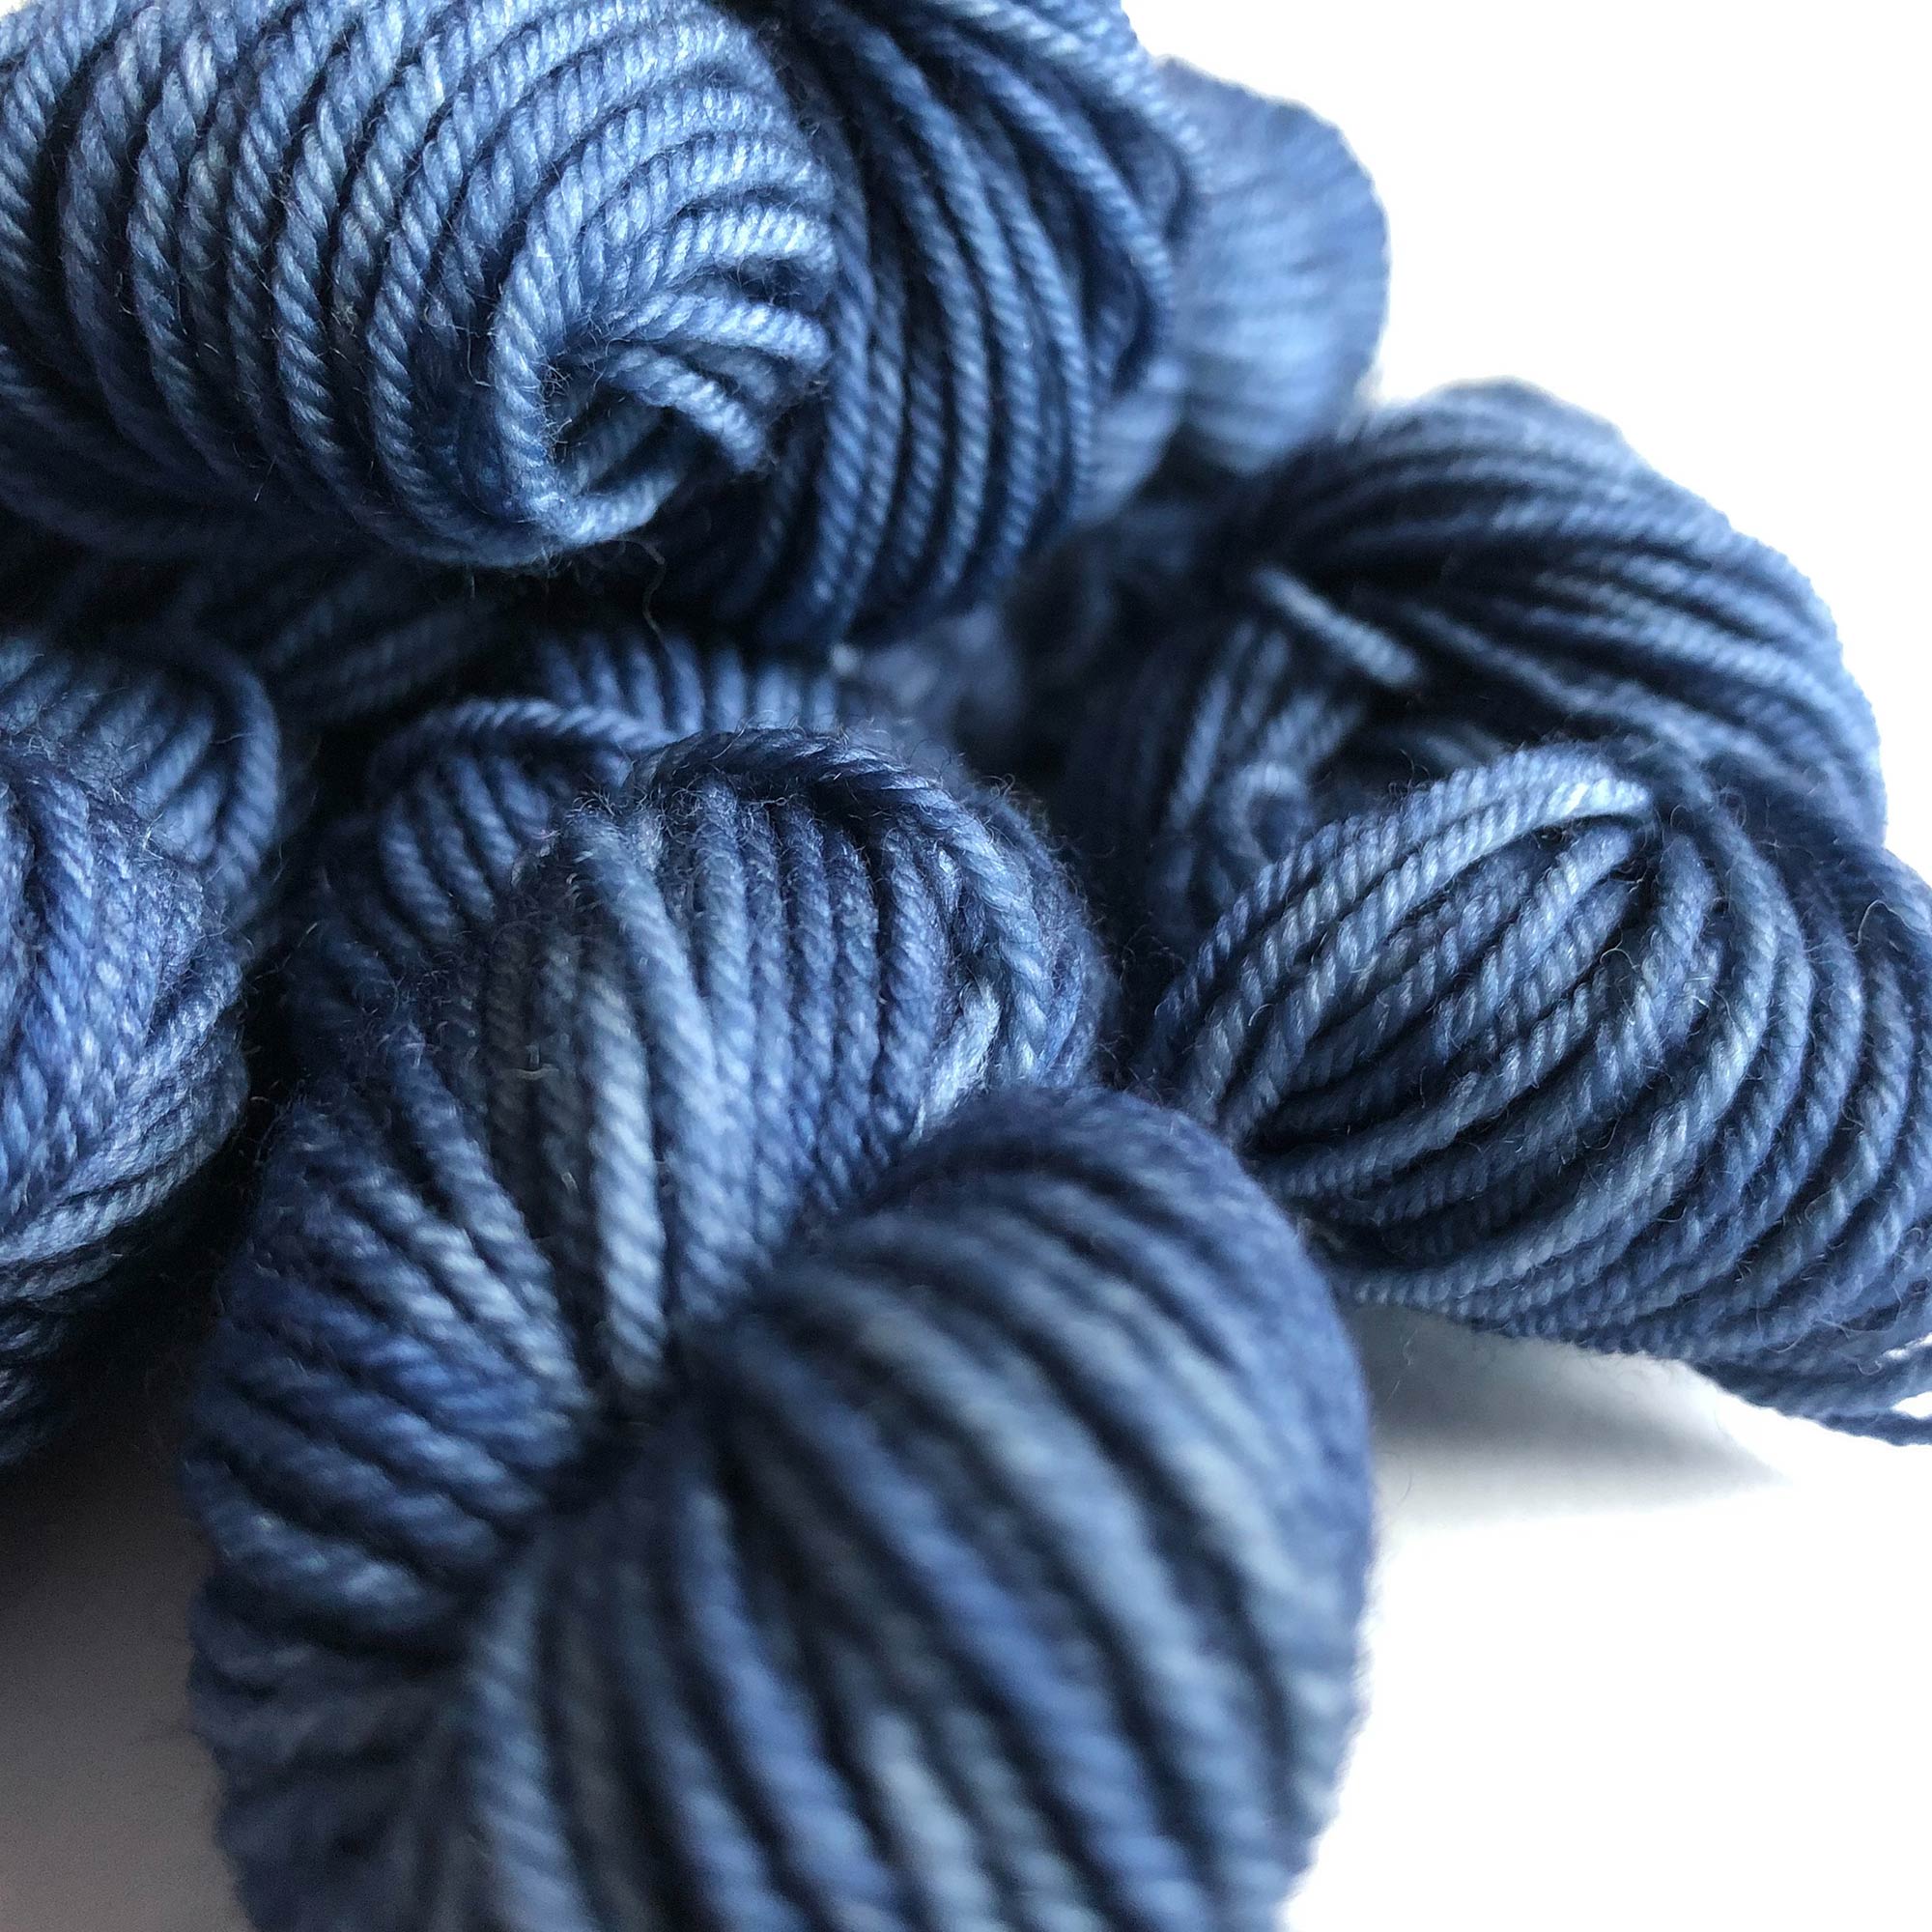 another close-up shows the tonality of the indigo on the sock yarn minis